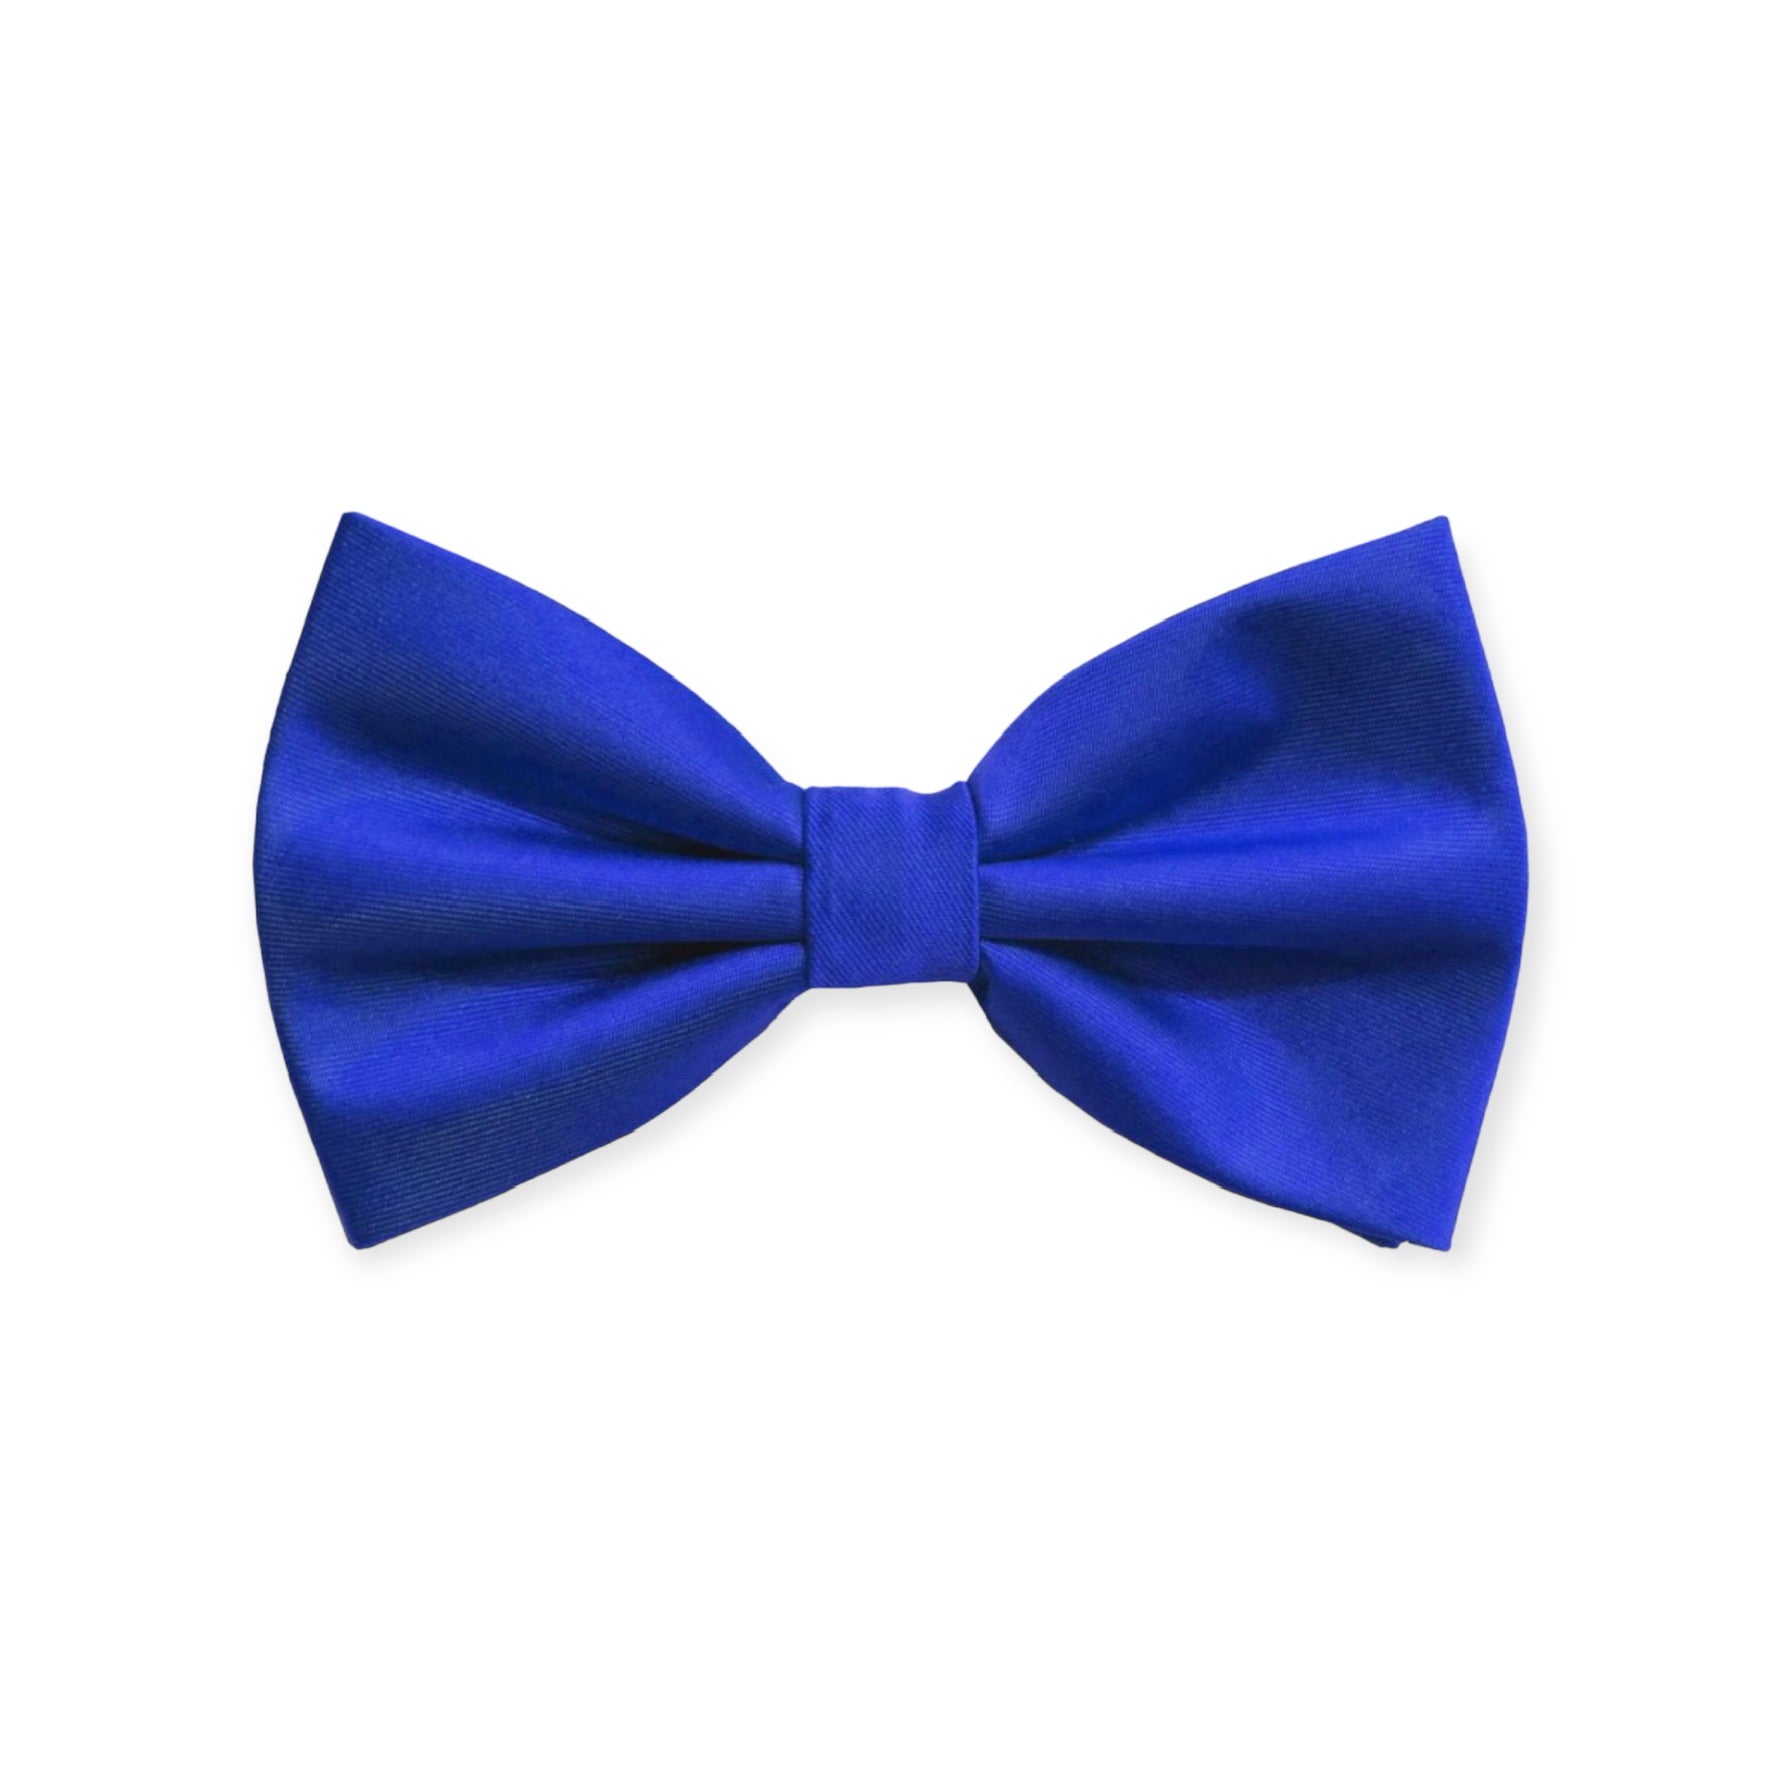 Solid Royal Blue Bow Tie and Hanky